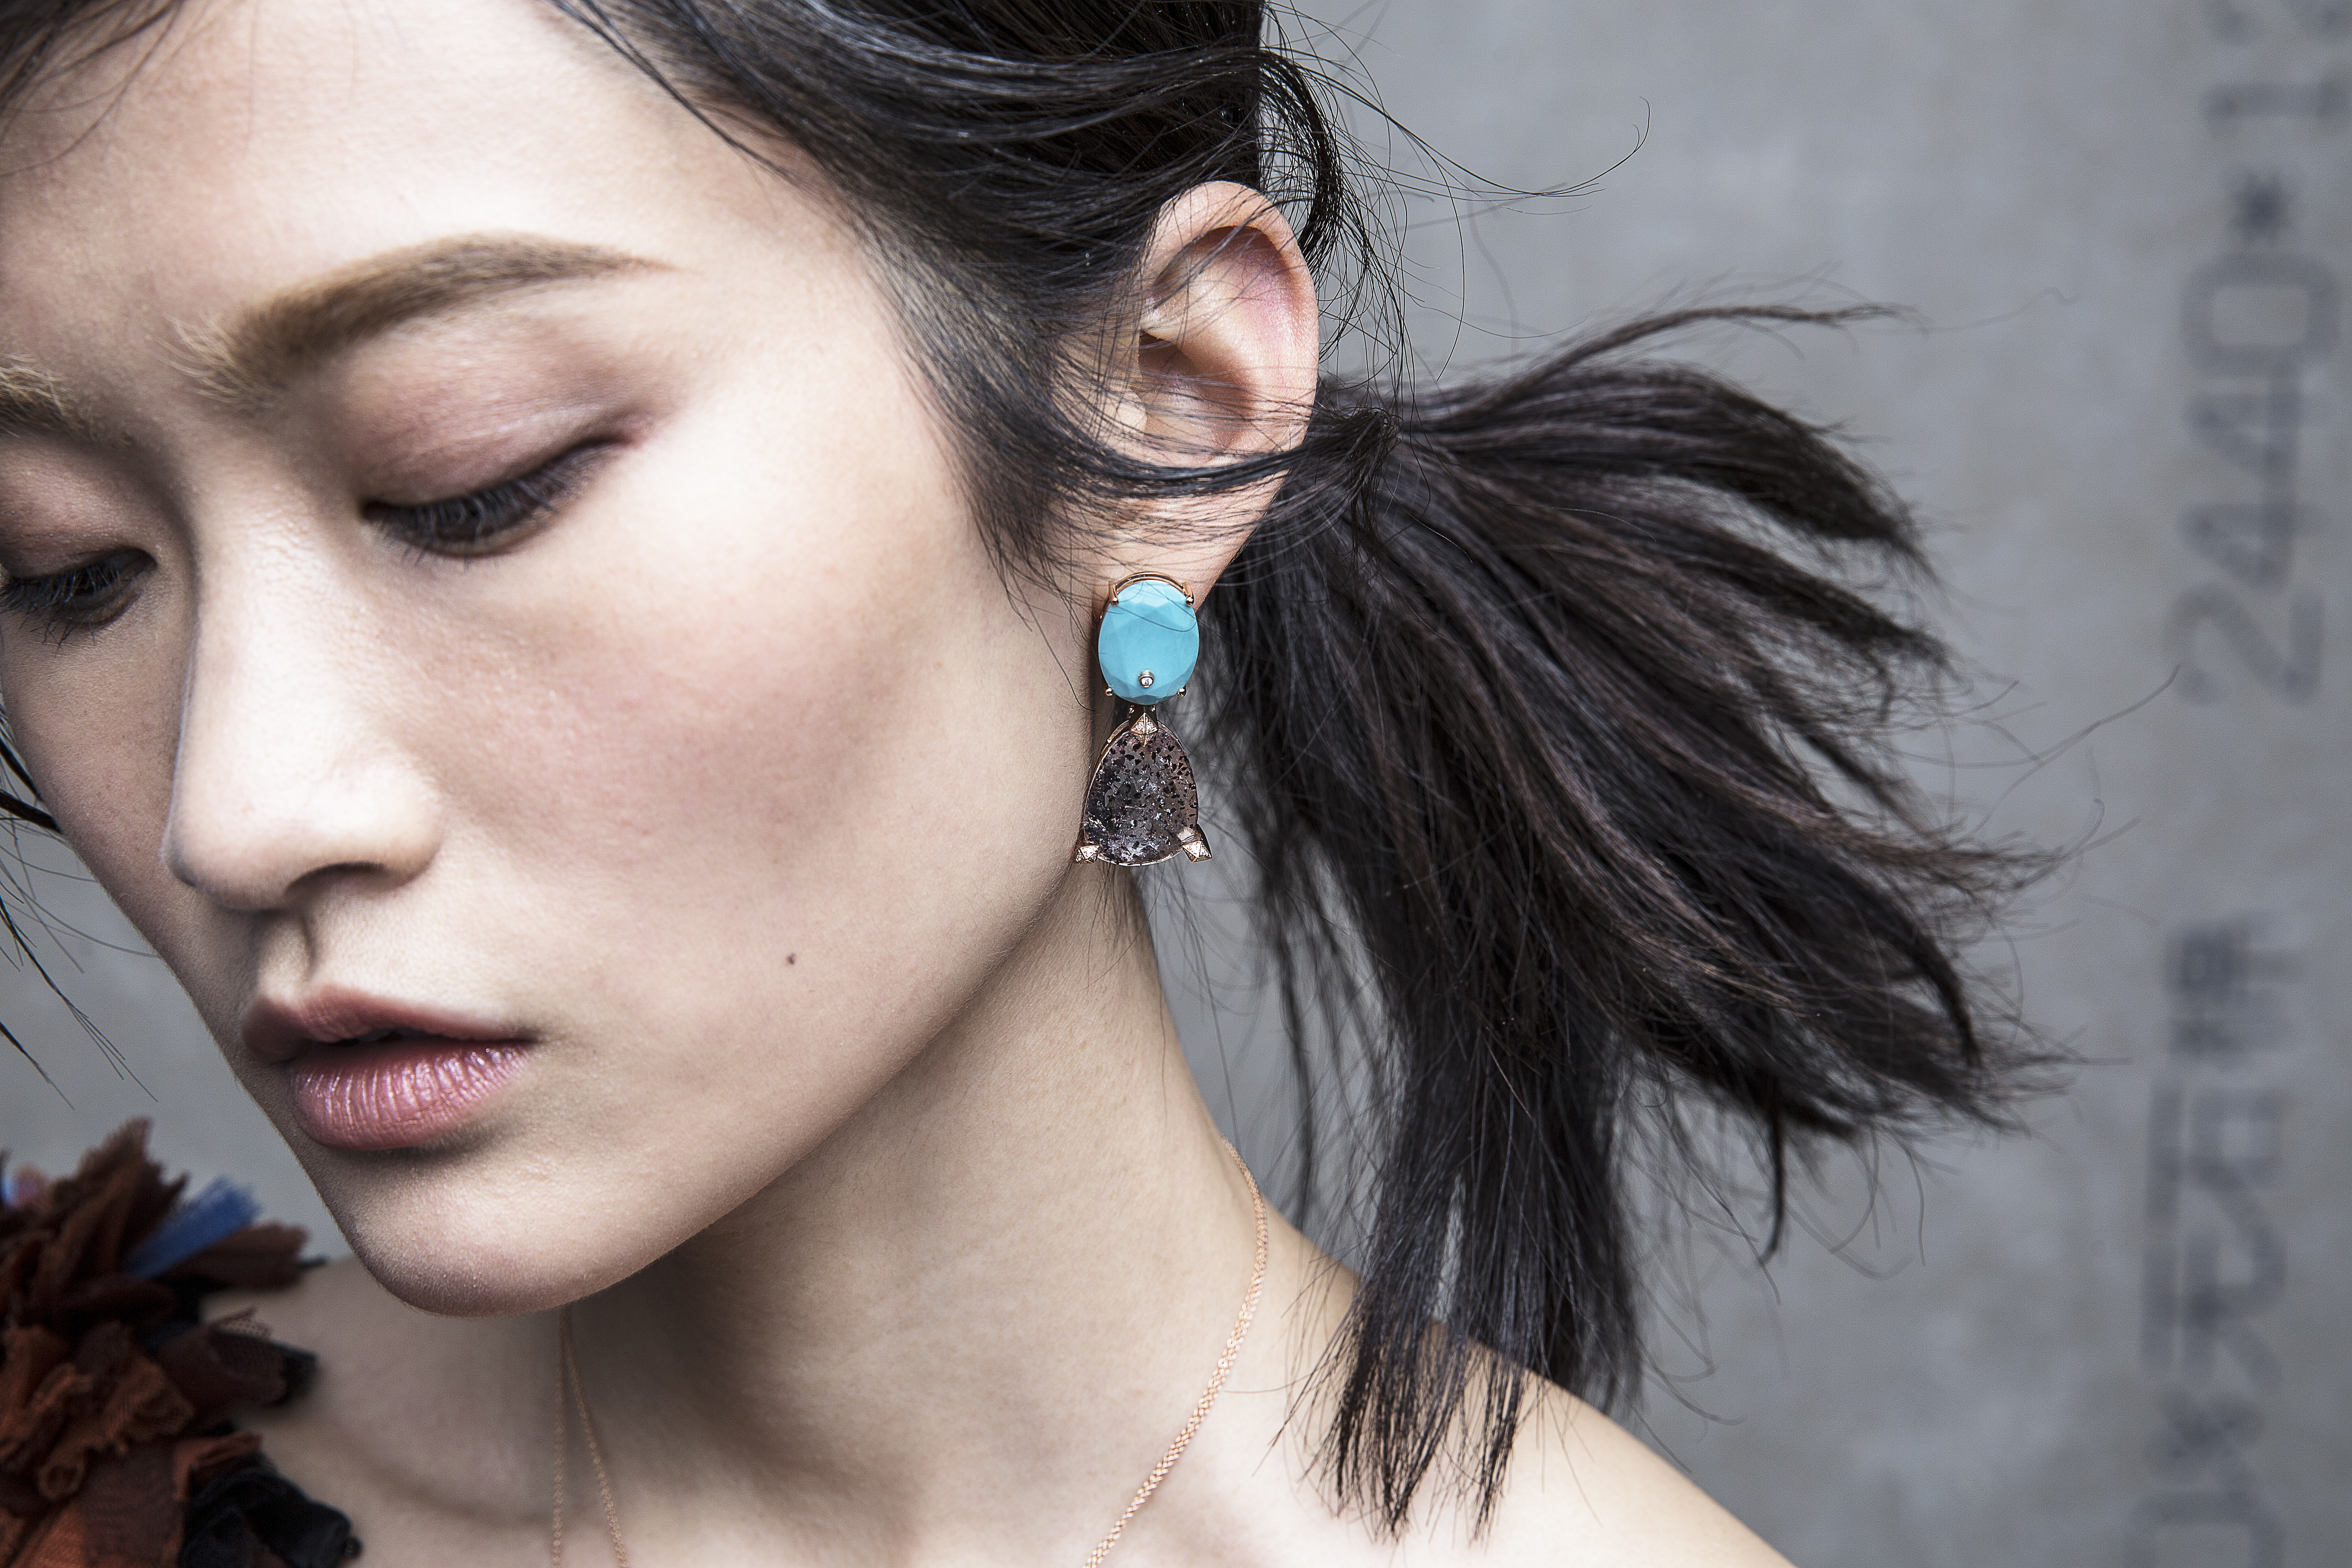 This handout image shows a models presents Turquoise, diamond, rutilated topas and smokey quartz earrings in 18K rose gold, by Lama Hourani. Photo / HANDOUT [11JANUARY2016 FEATURES LIFE FASHION]